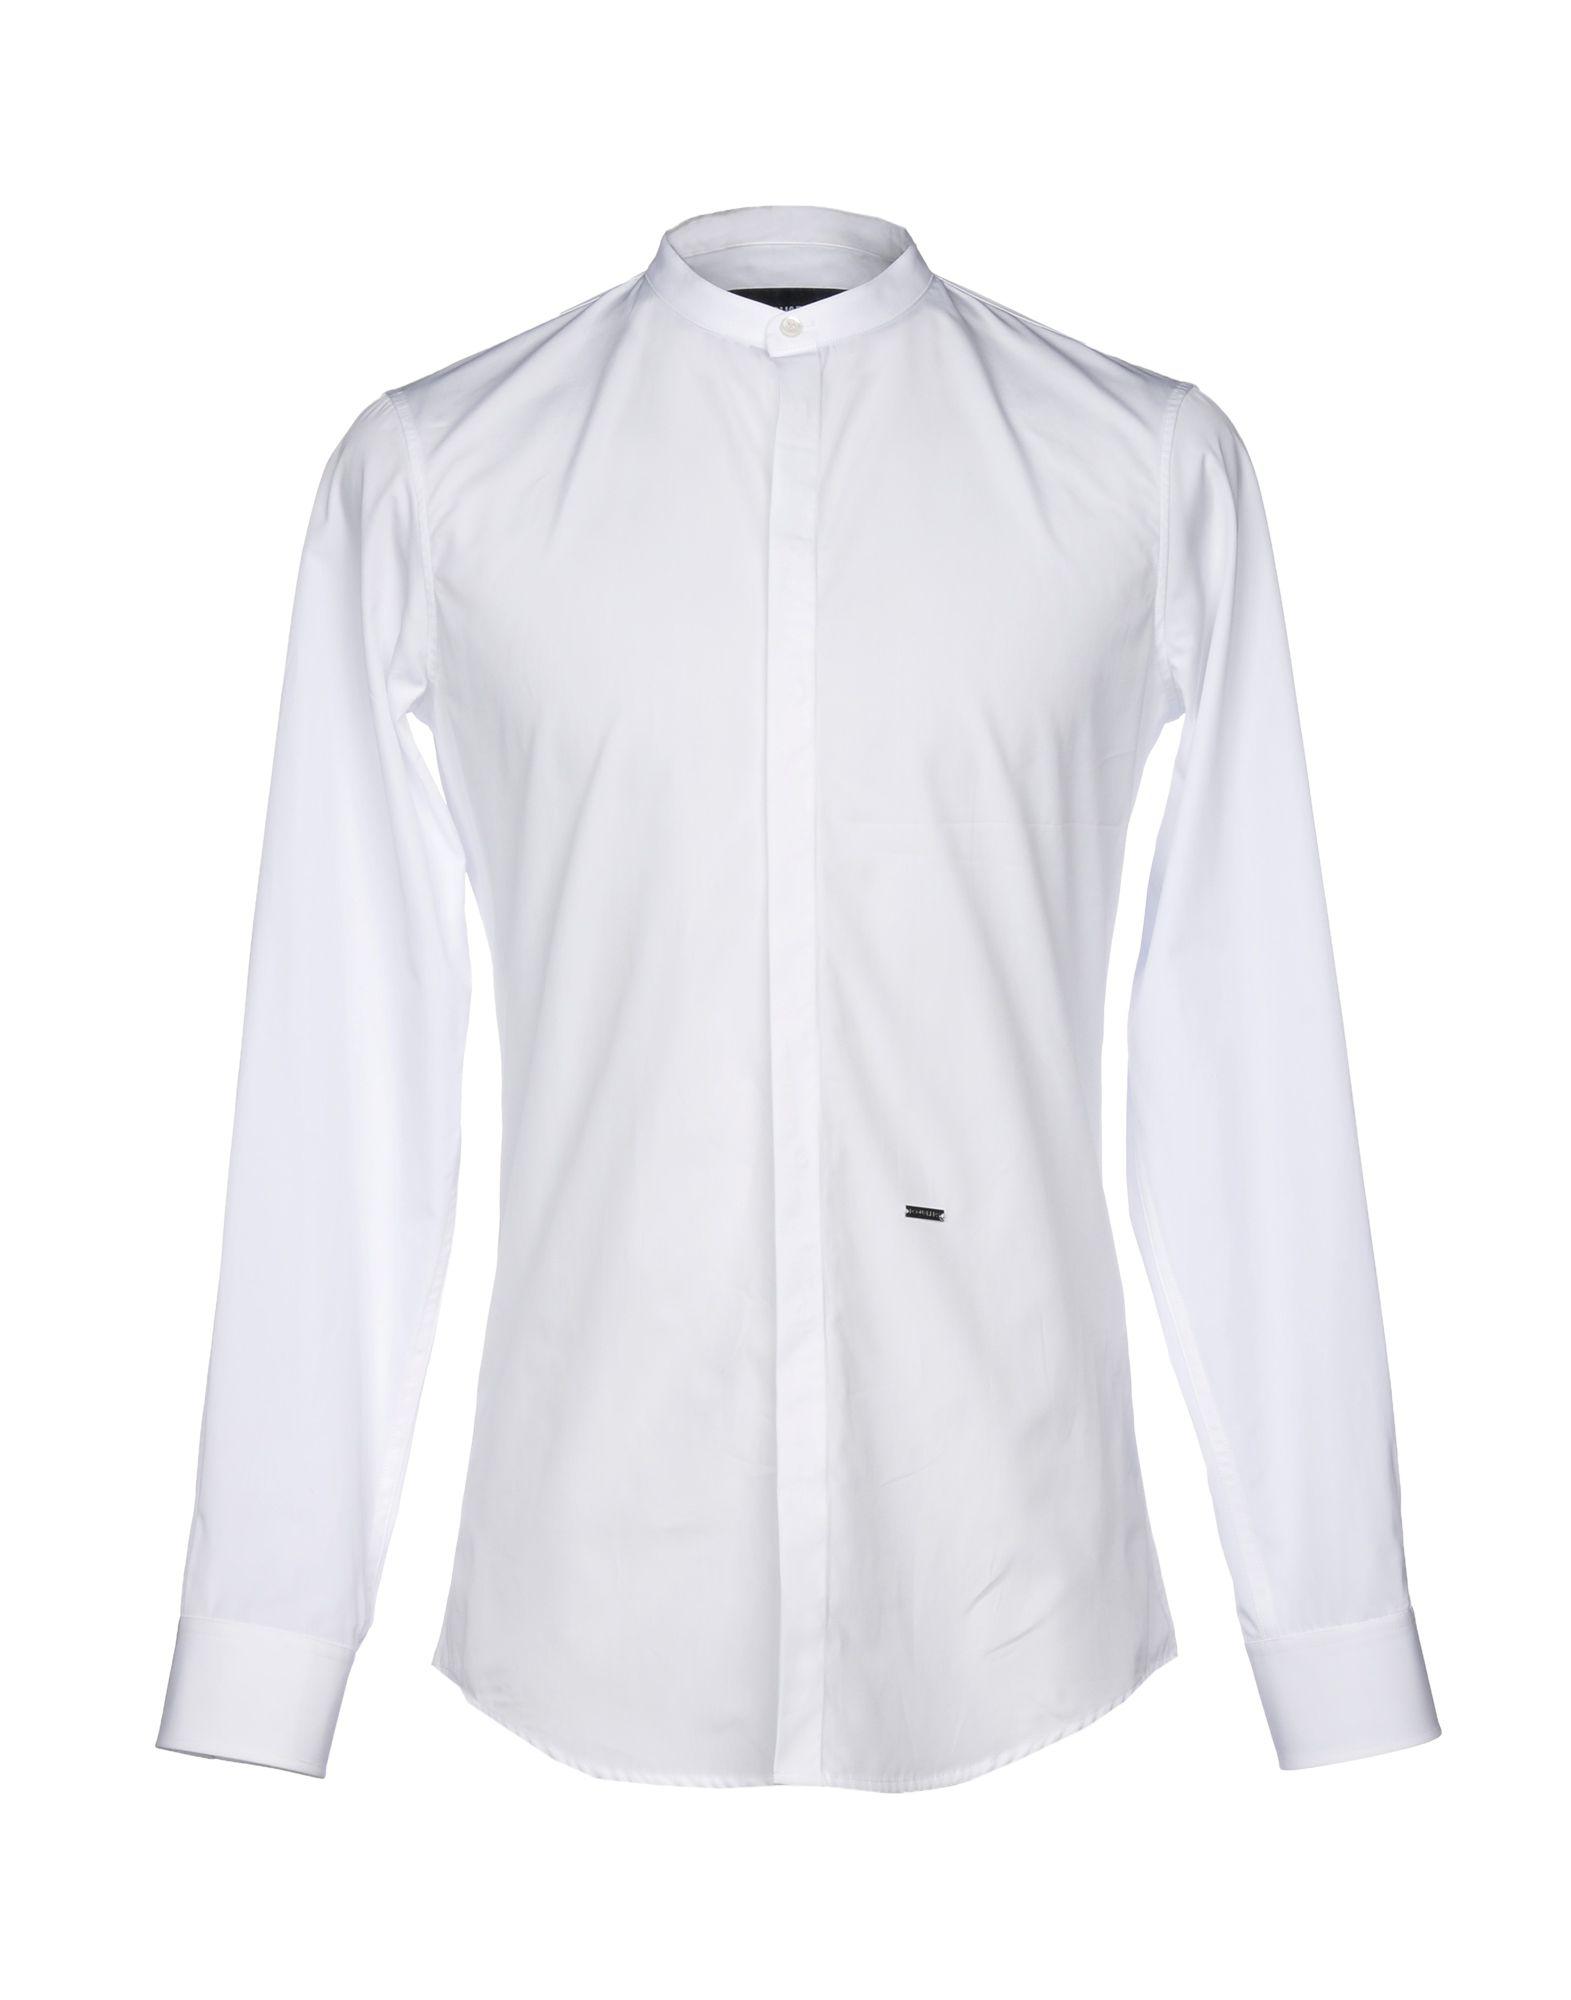 DSquared² Cotton Shirt in White for Men - Lyst